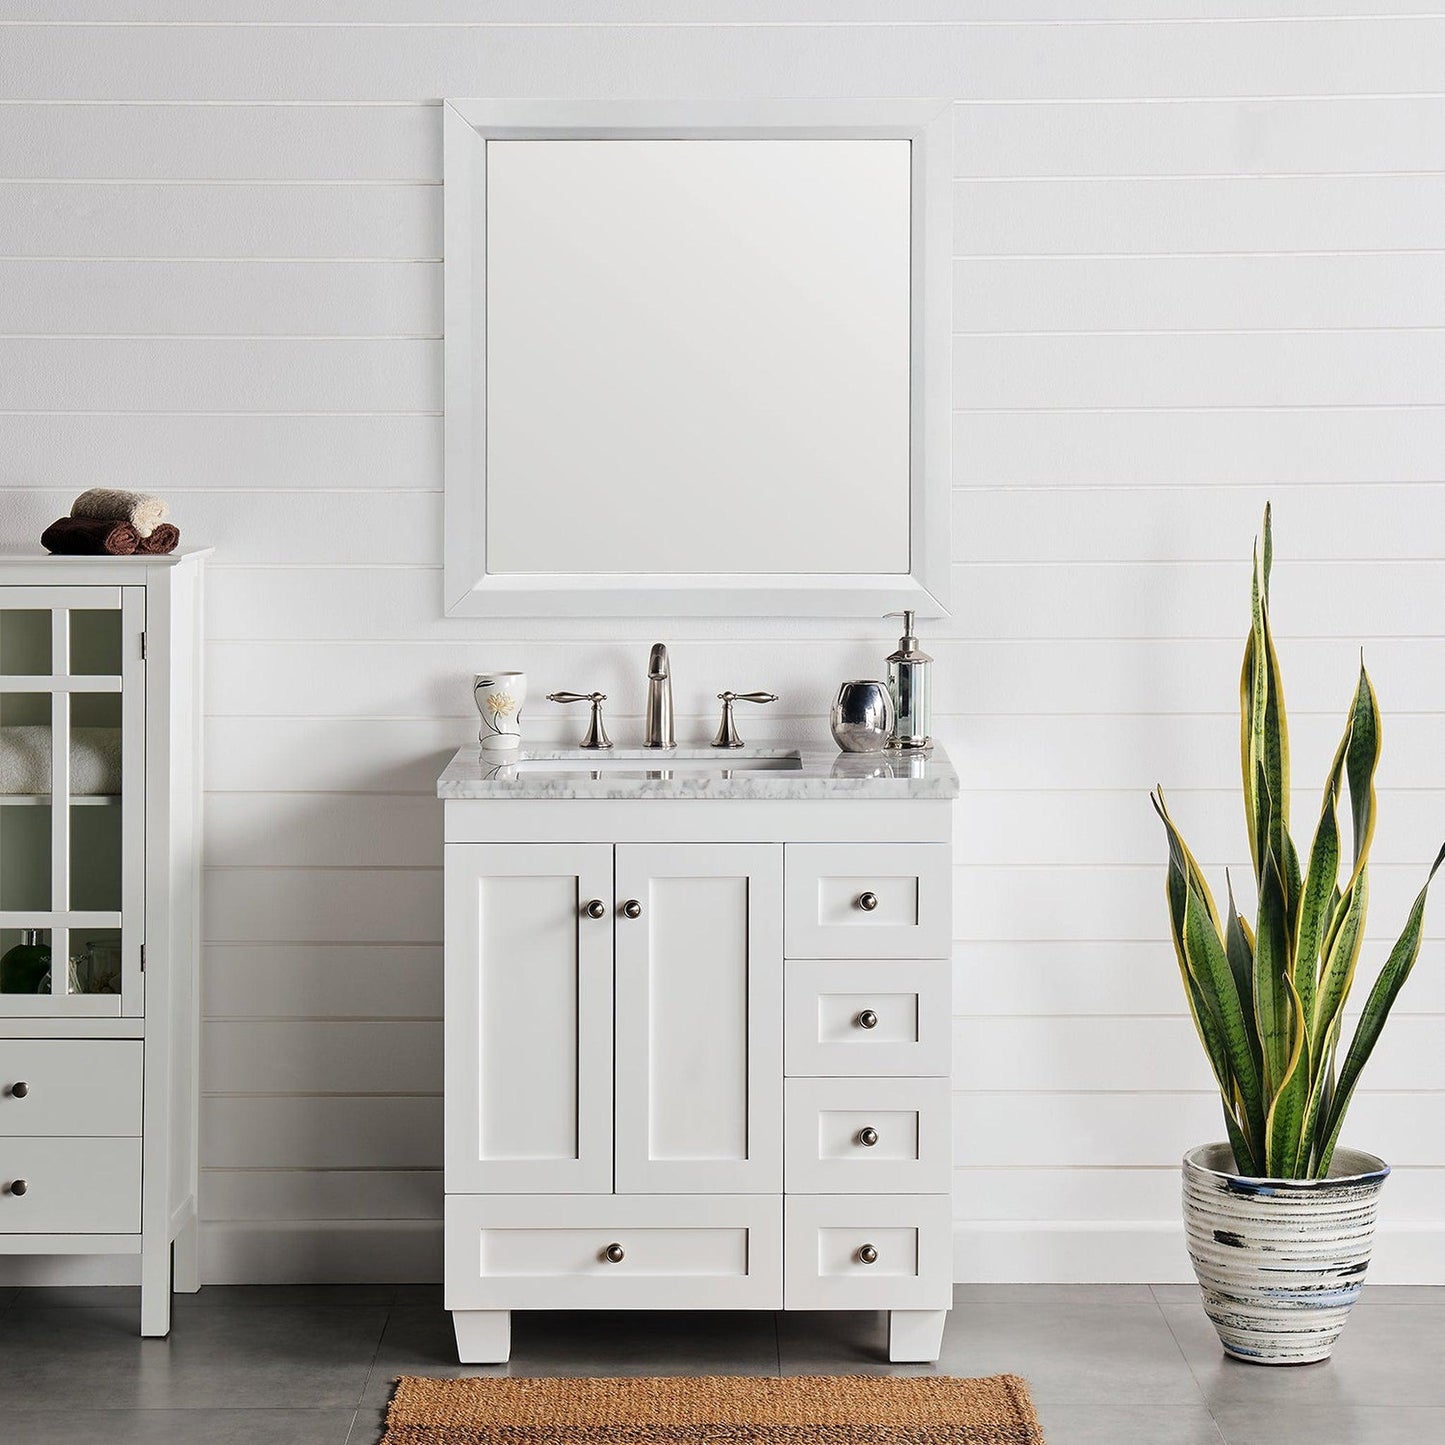 Eviva Acclaim 30" x 34" Freestanding White Bathroom Vanity With White Carrara Marble Countertop and Single Undermount Sink